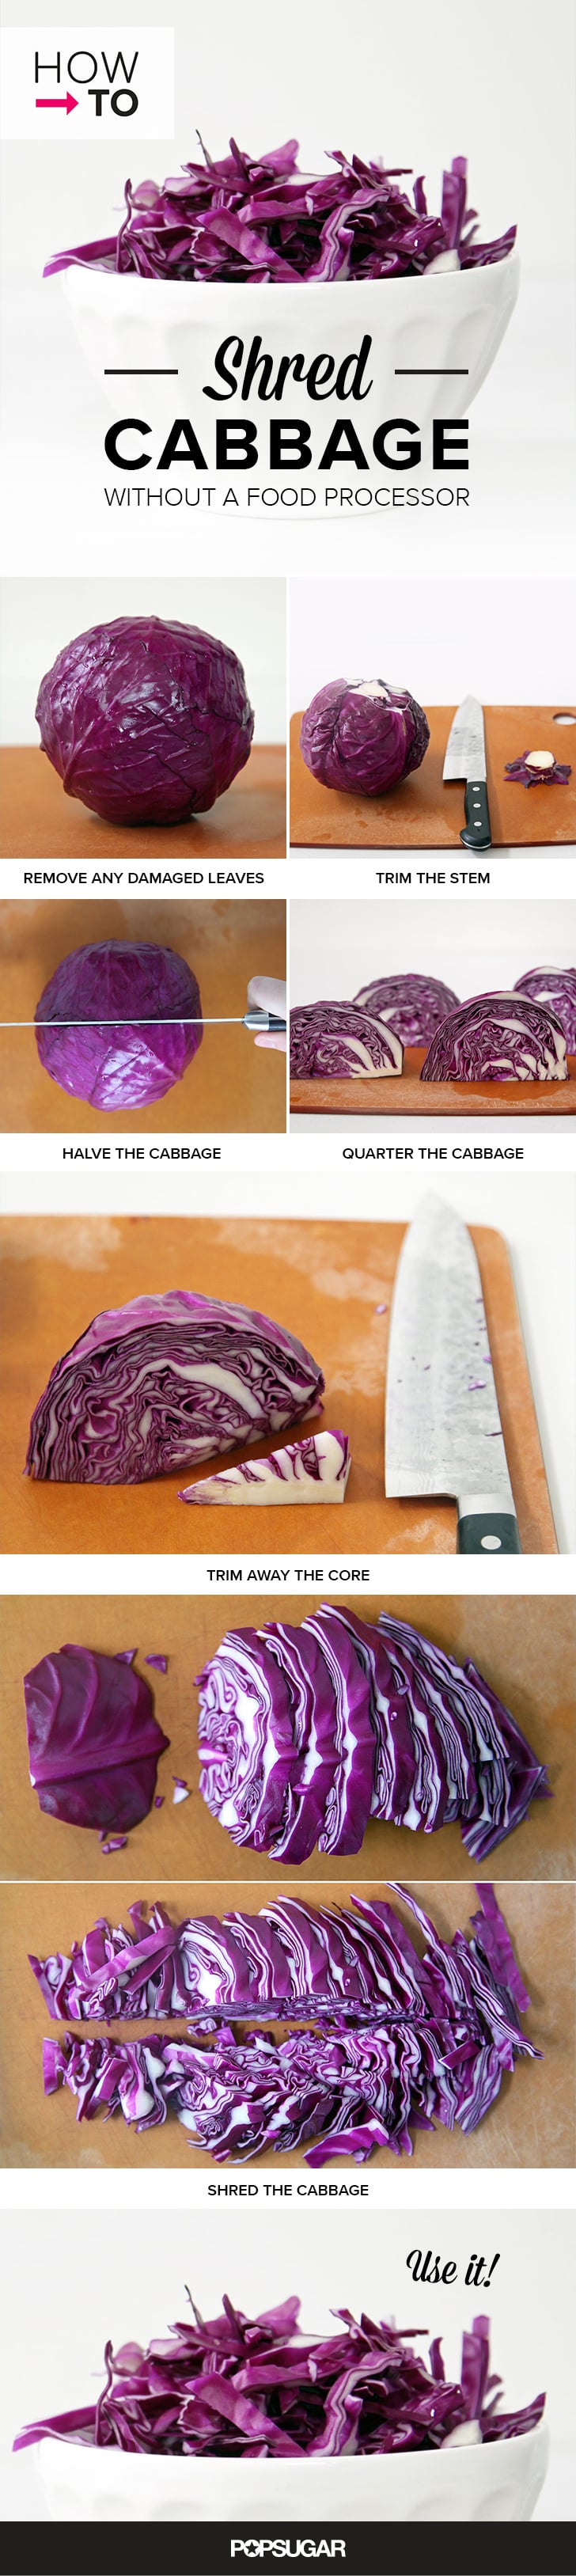 How to shred cabbage 